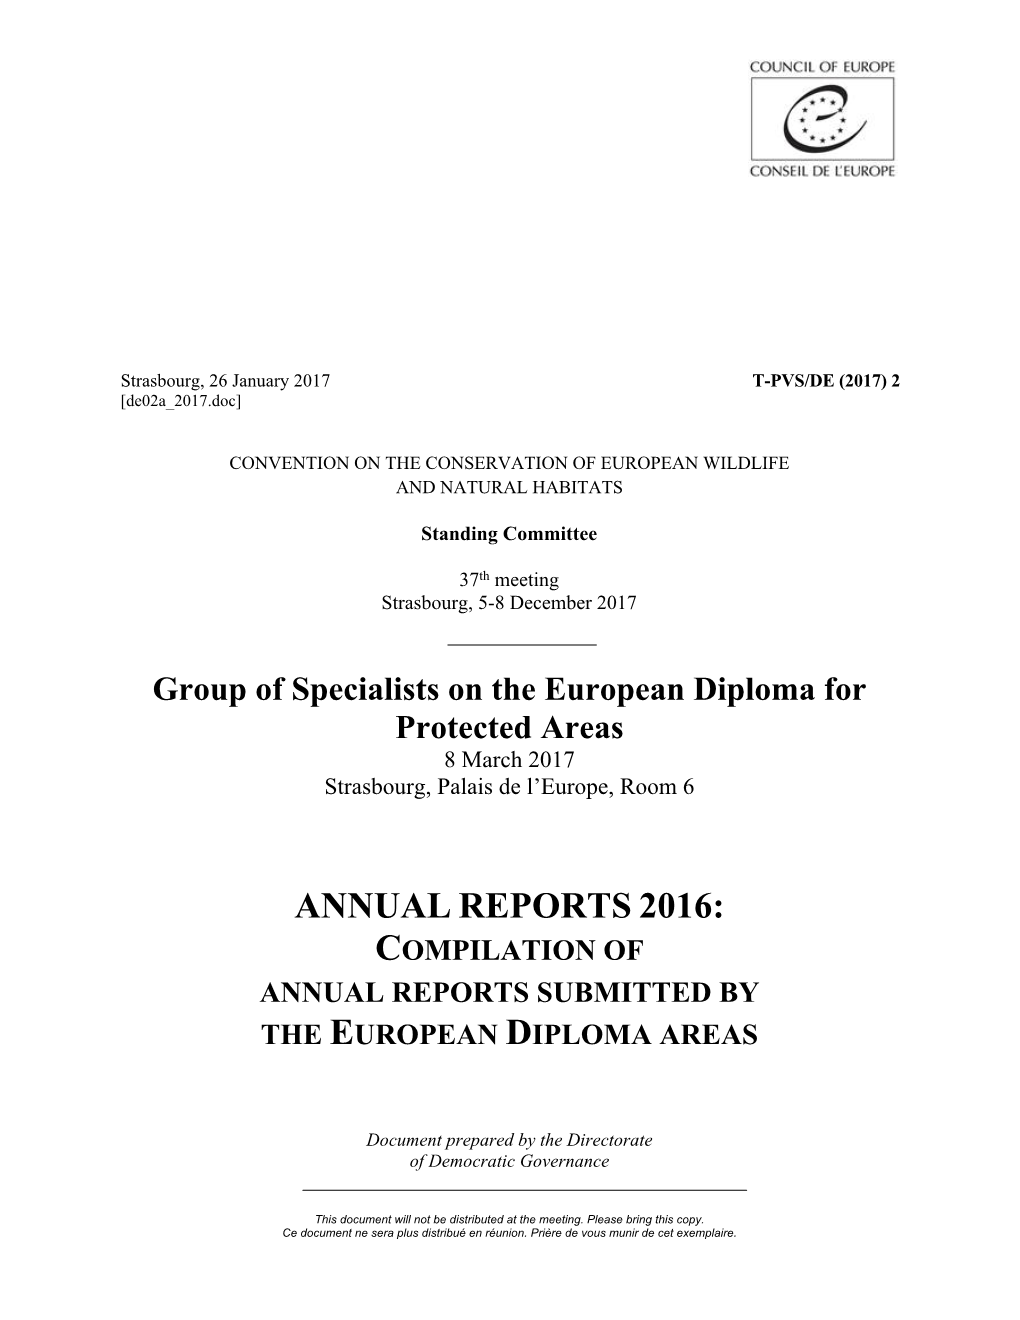 Annual Reports 2016: Compilation of Annual Reports Submitted by the European Diploma Areas